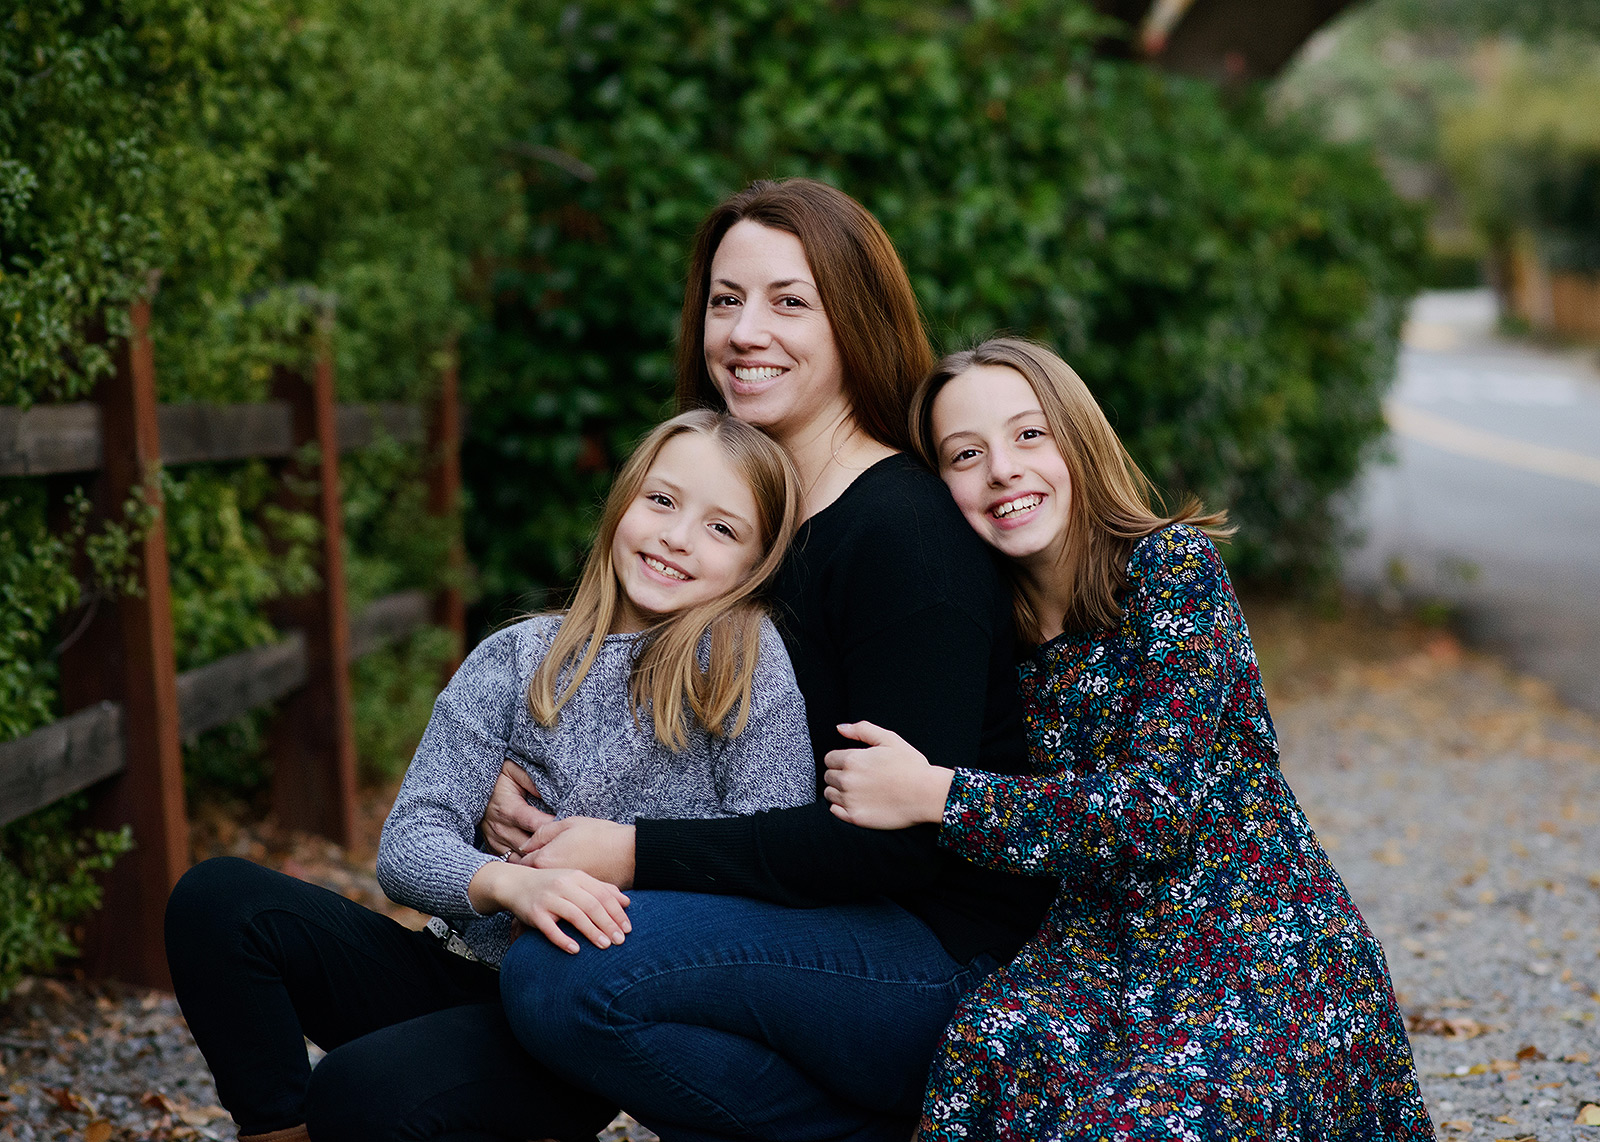 Mom and daughters hugging outdoors near trees in Saratoga